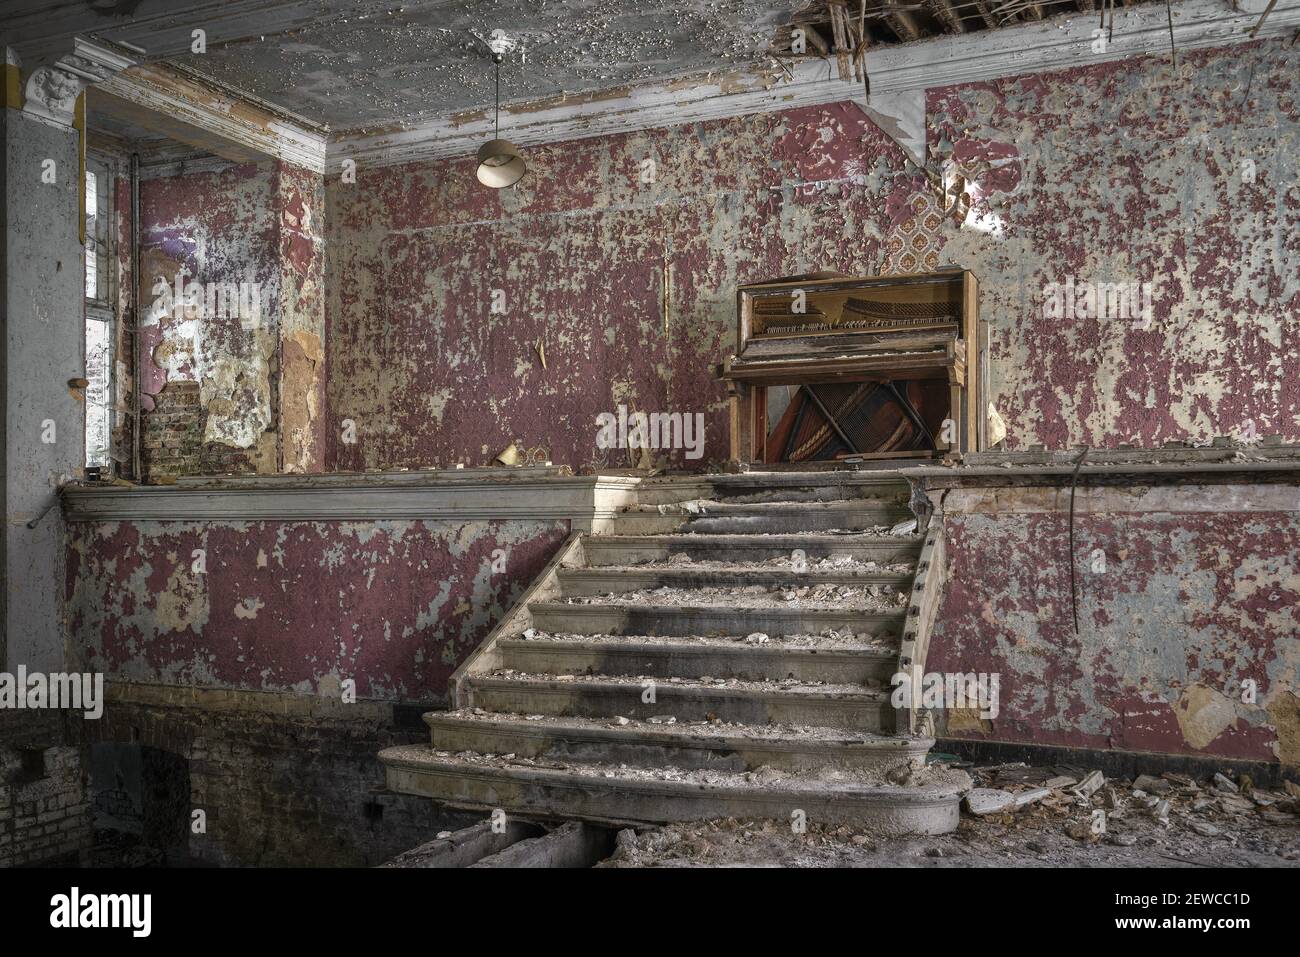 An old broken piano in an abandoned ruined building Stock Photo